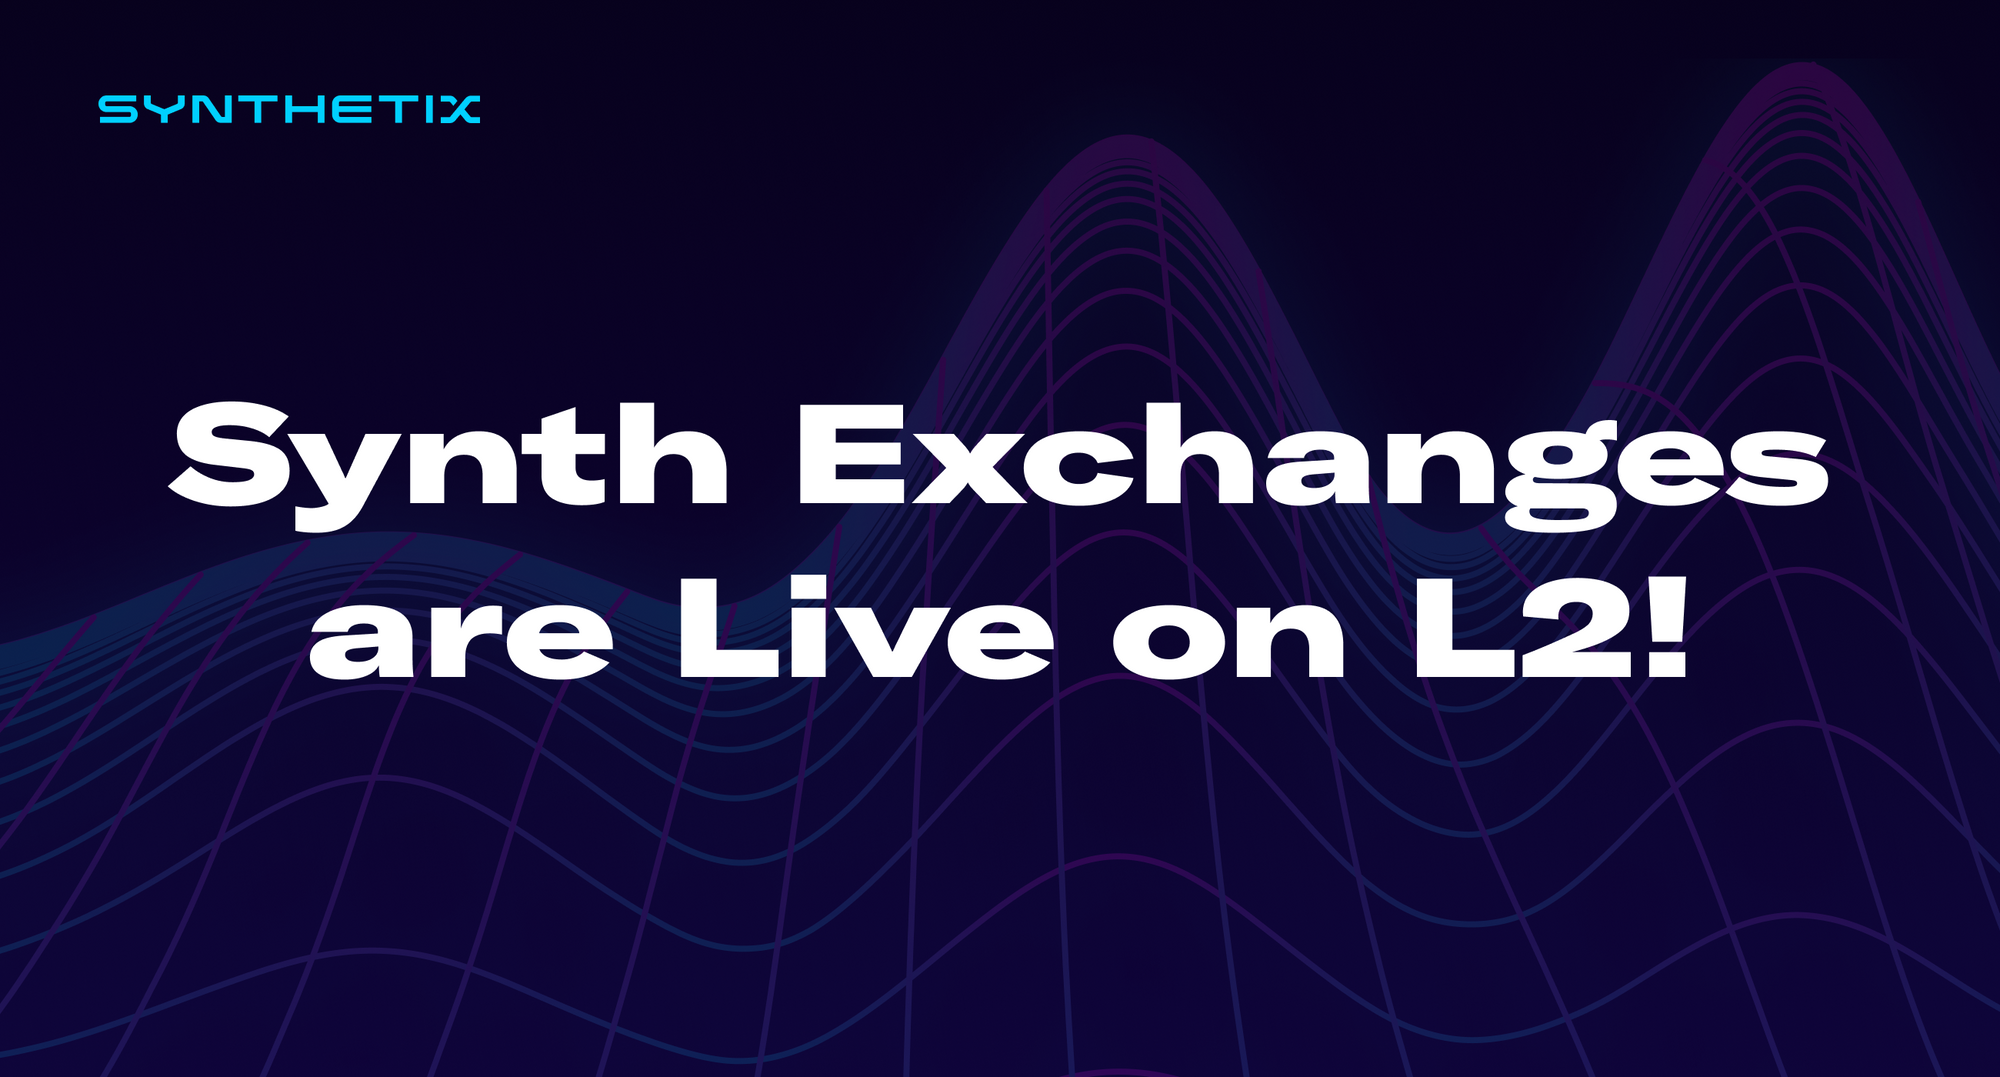 Synth Exchanges are Live on L2!